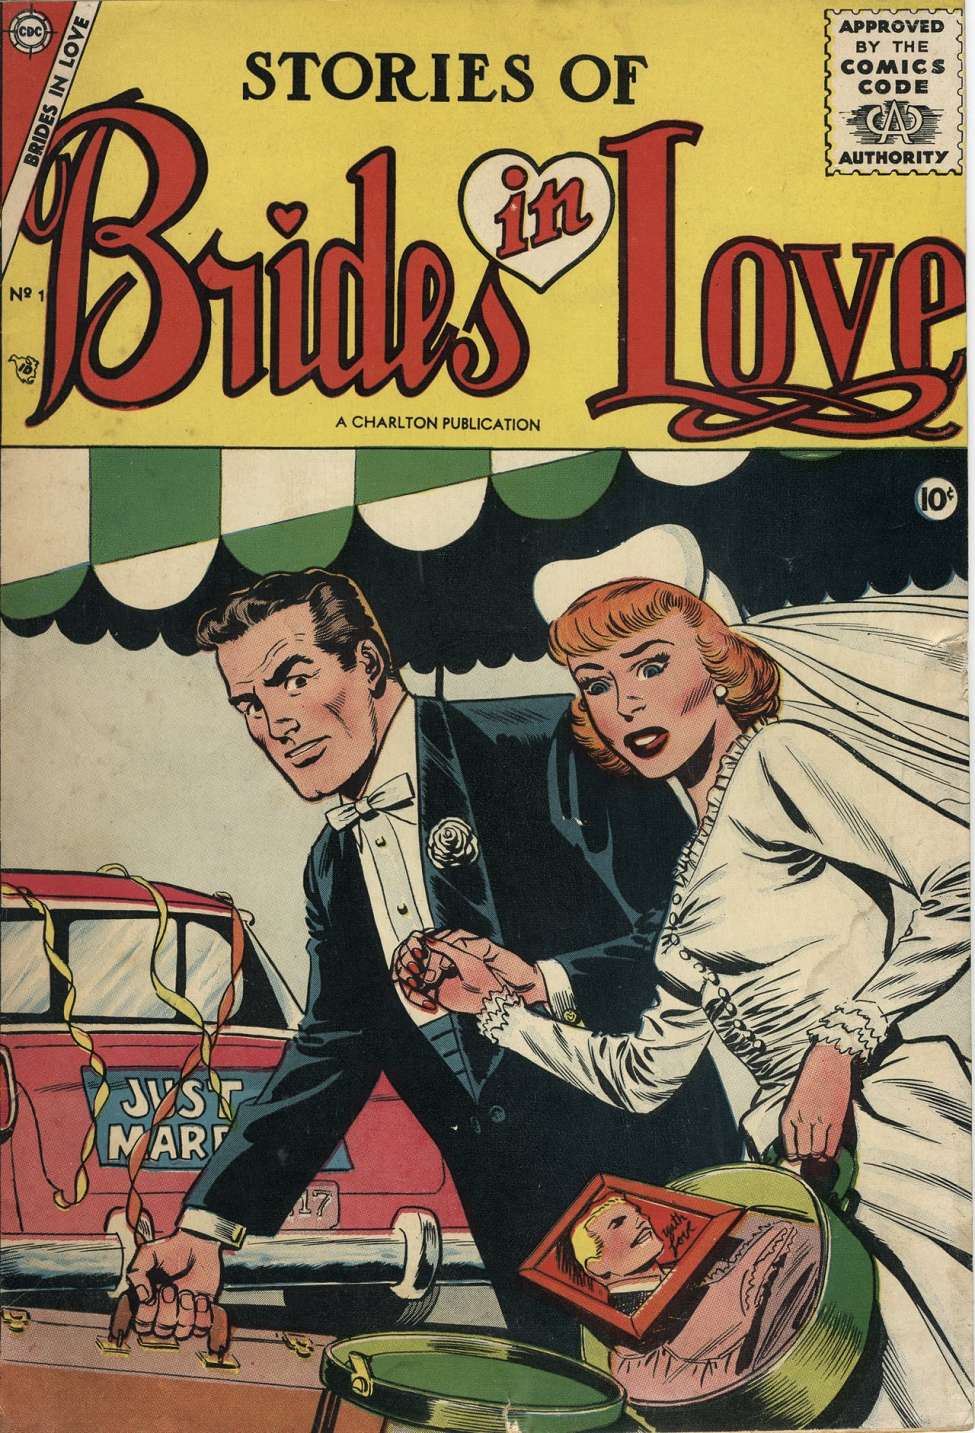 Book Cover For Brides in Love 1